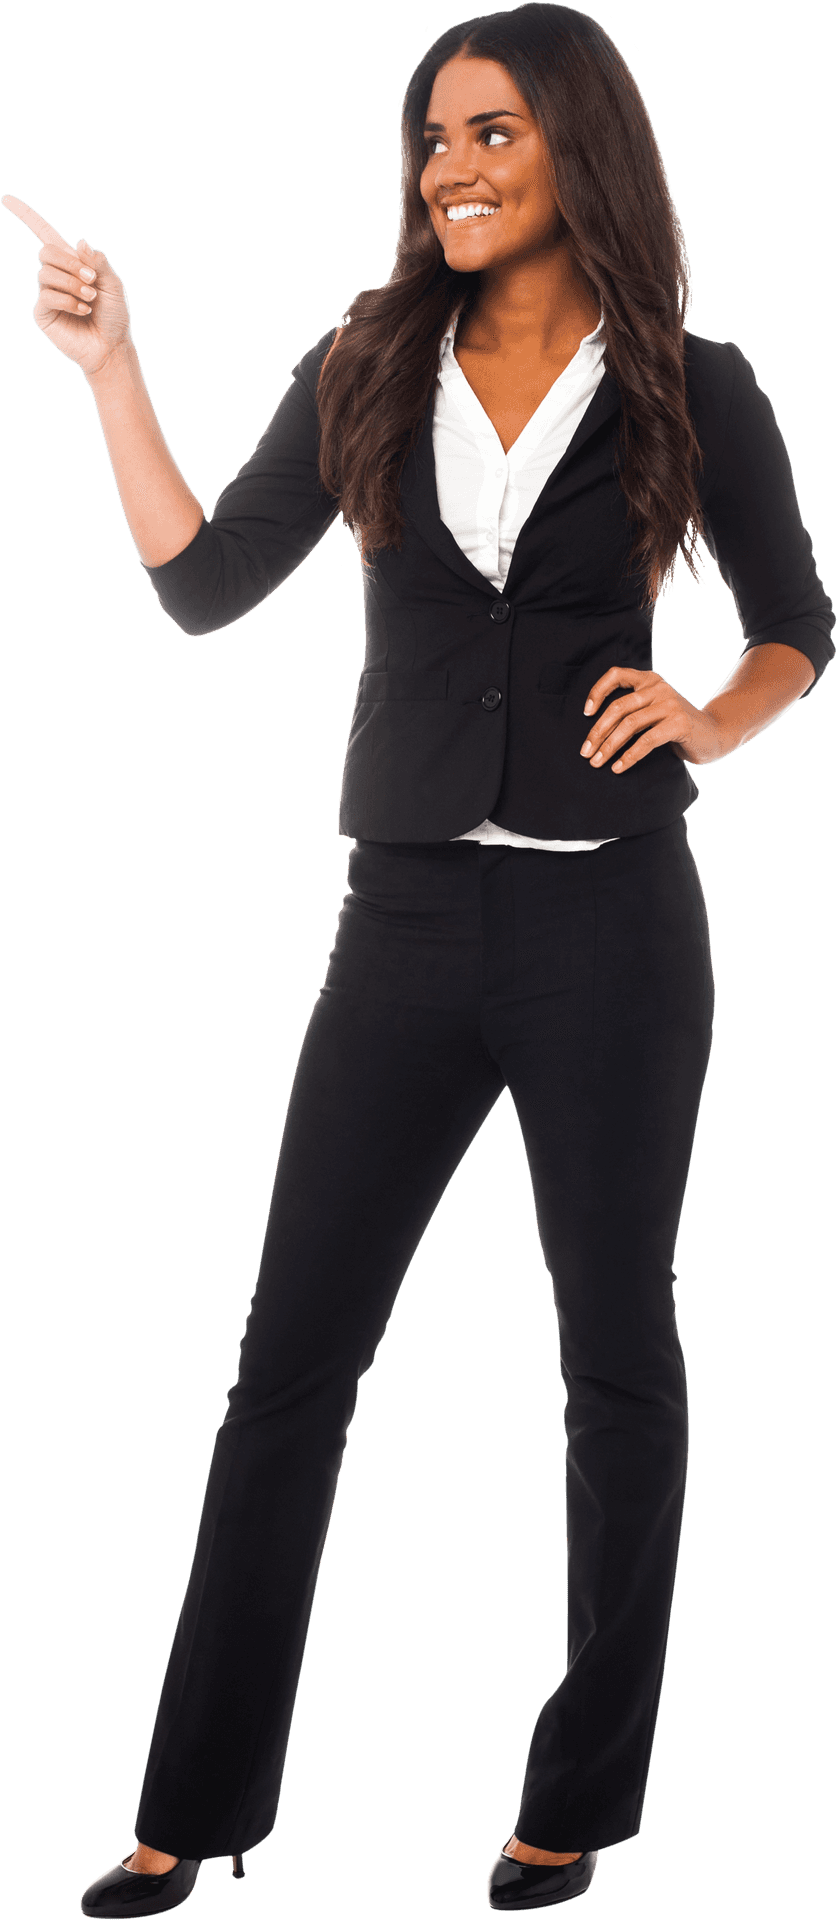 Confident Businesswoman Pointing Upward PNG